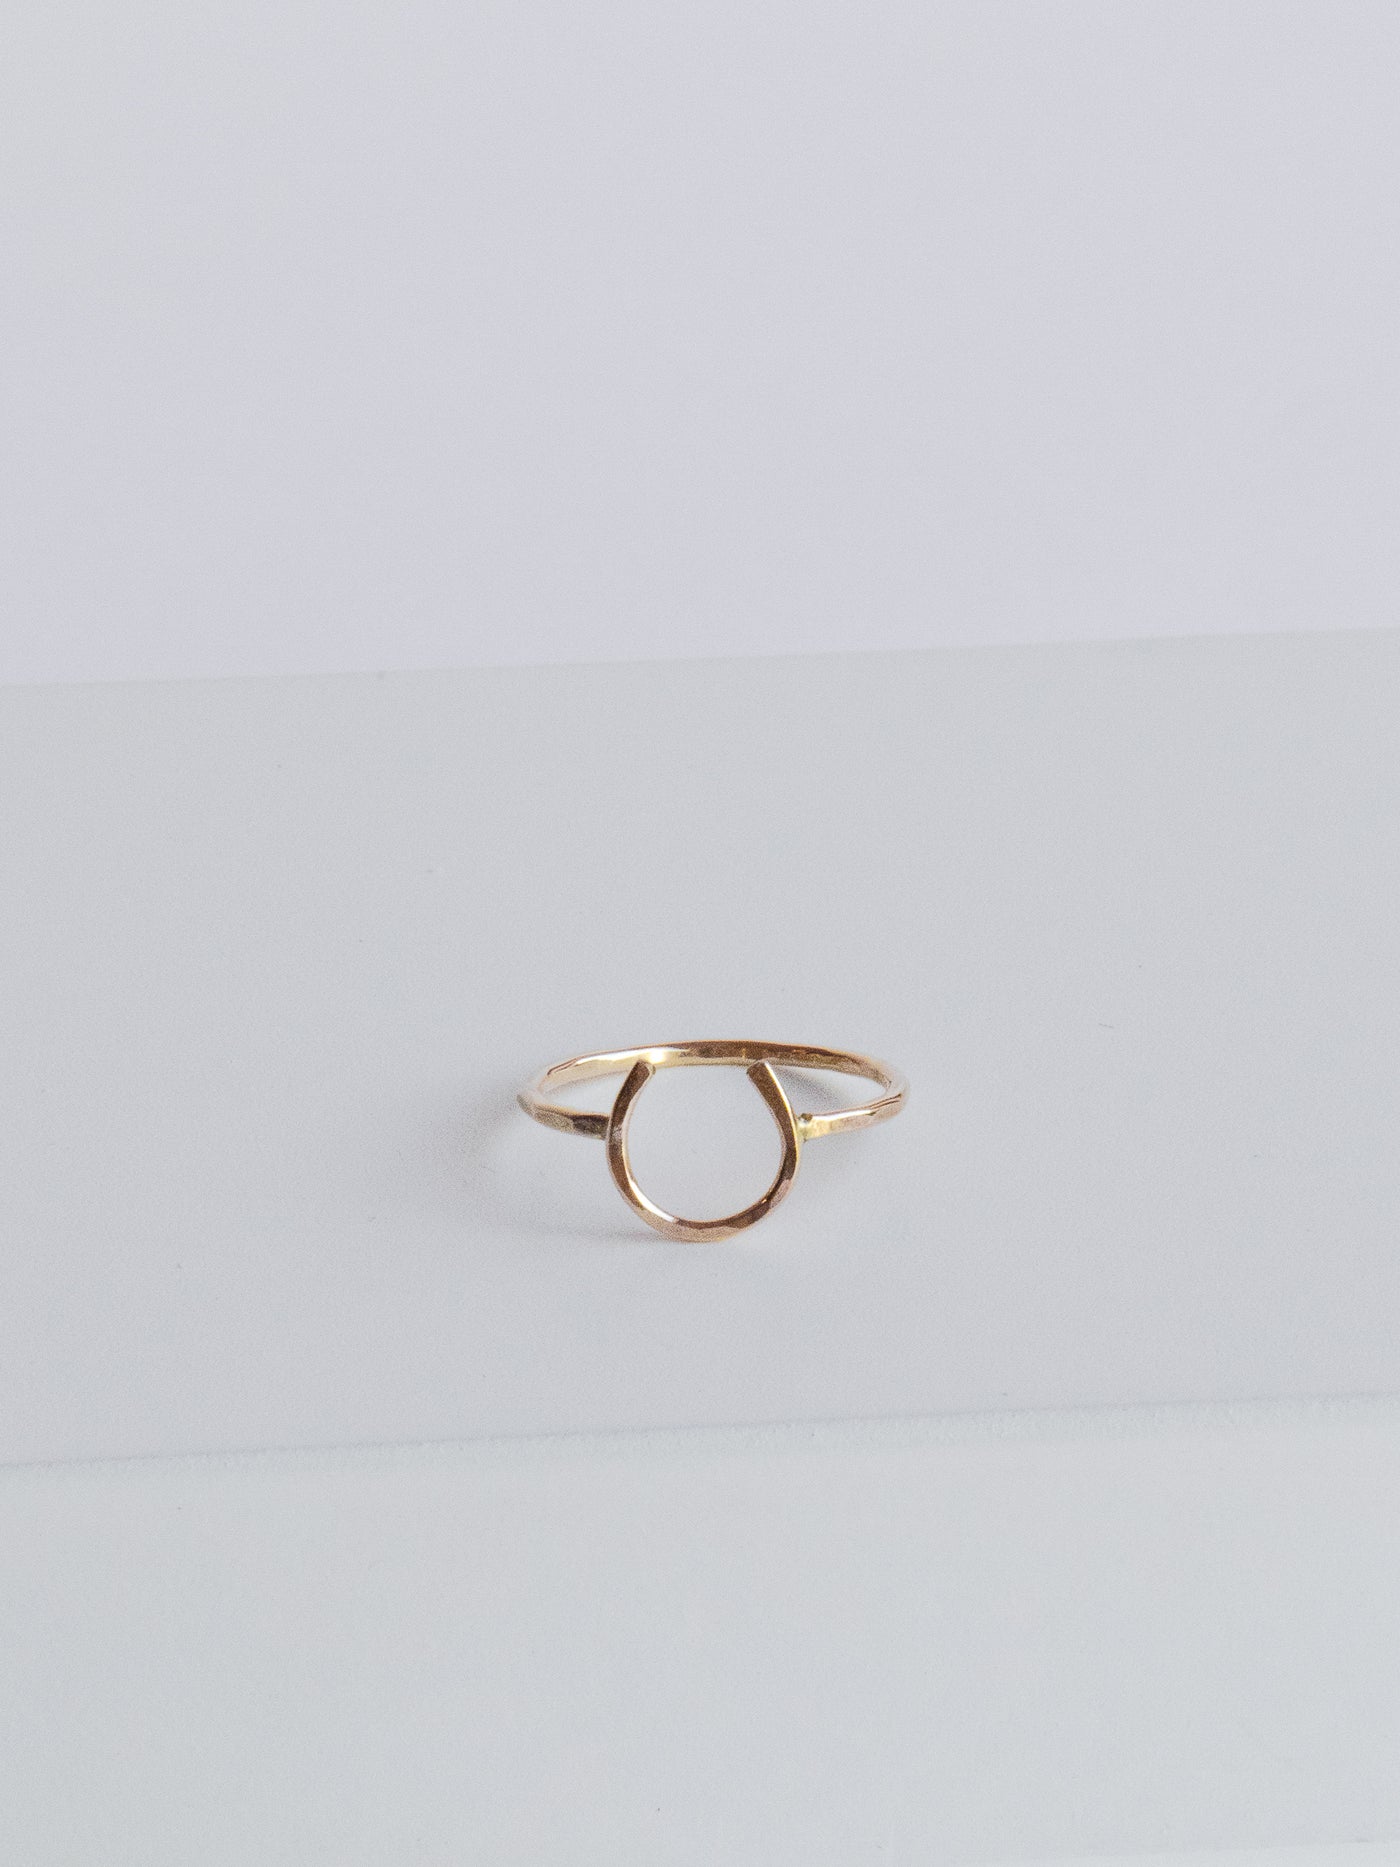 Gold Small Lucky Horseshoe Ring. Made from 14k yellow gold fill in a size 7.